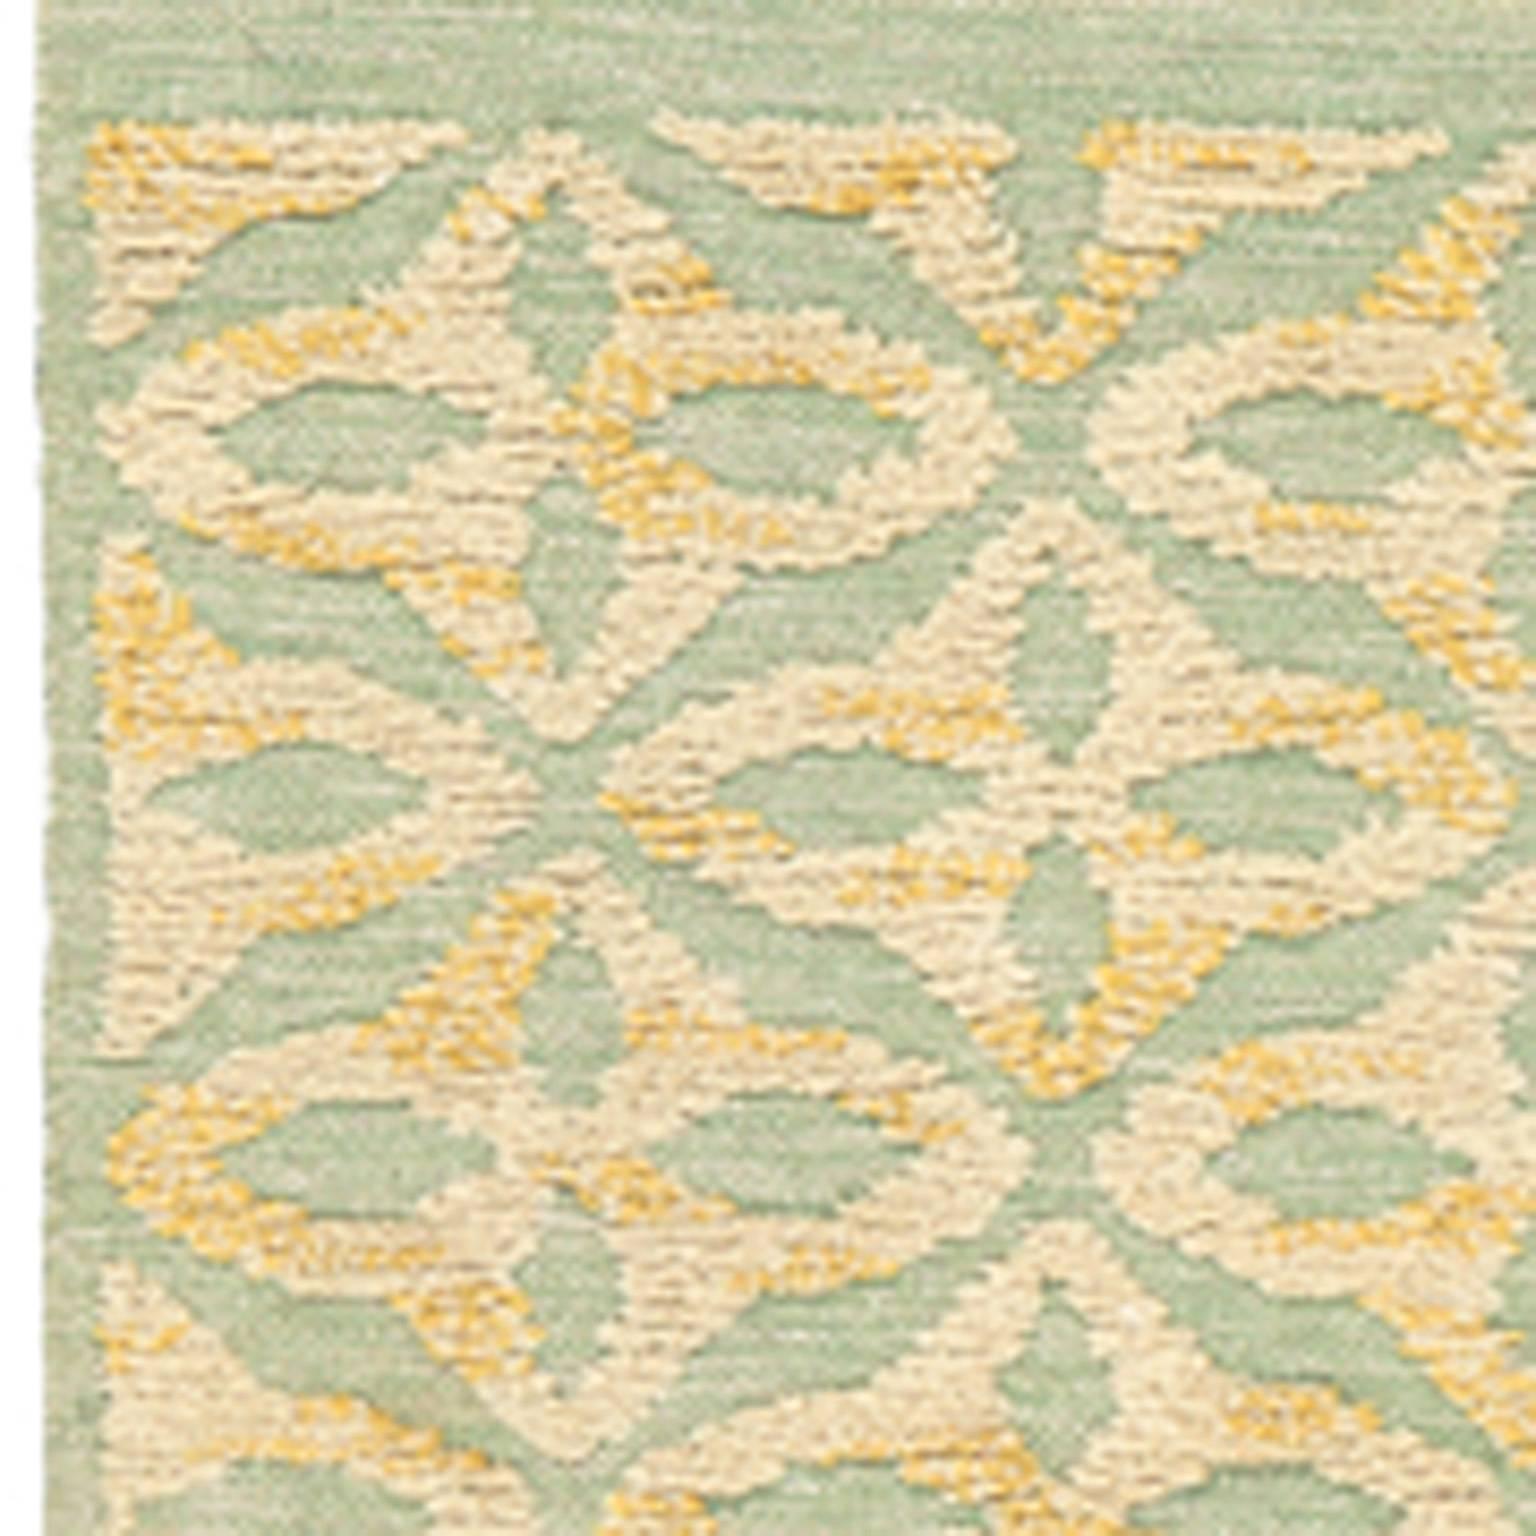 Hand-Woven Mid-20th Century Swedish Mixed Weave Rug by Brita Grahn For Sale